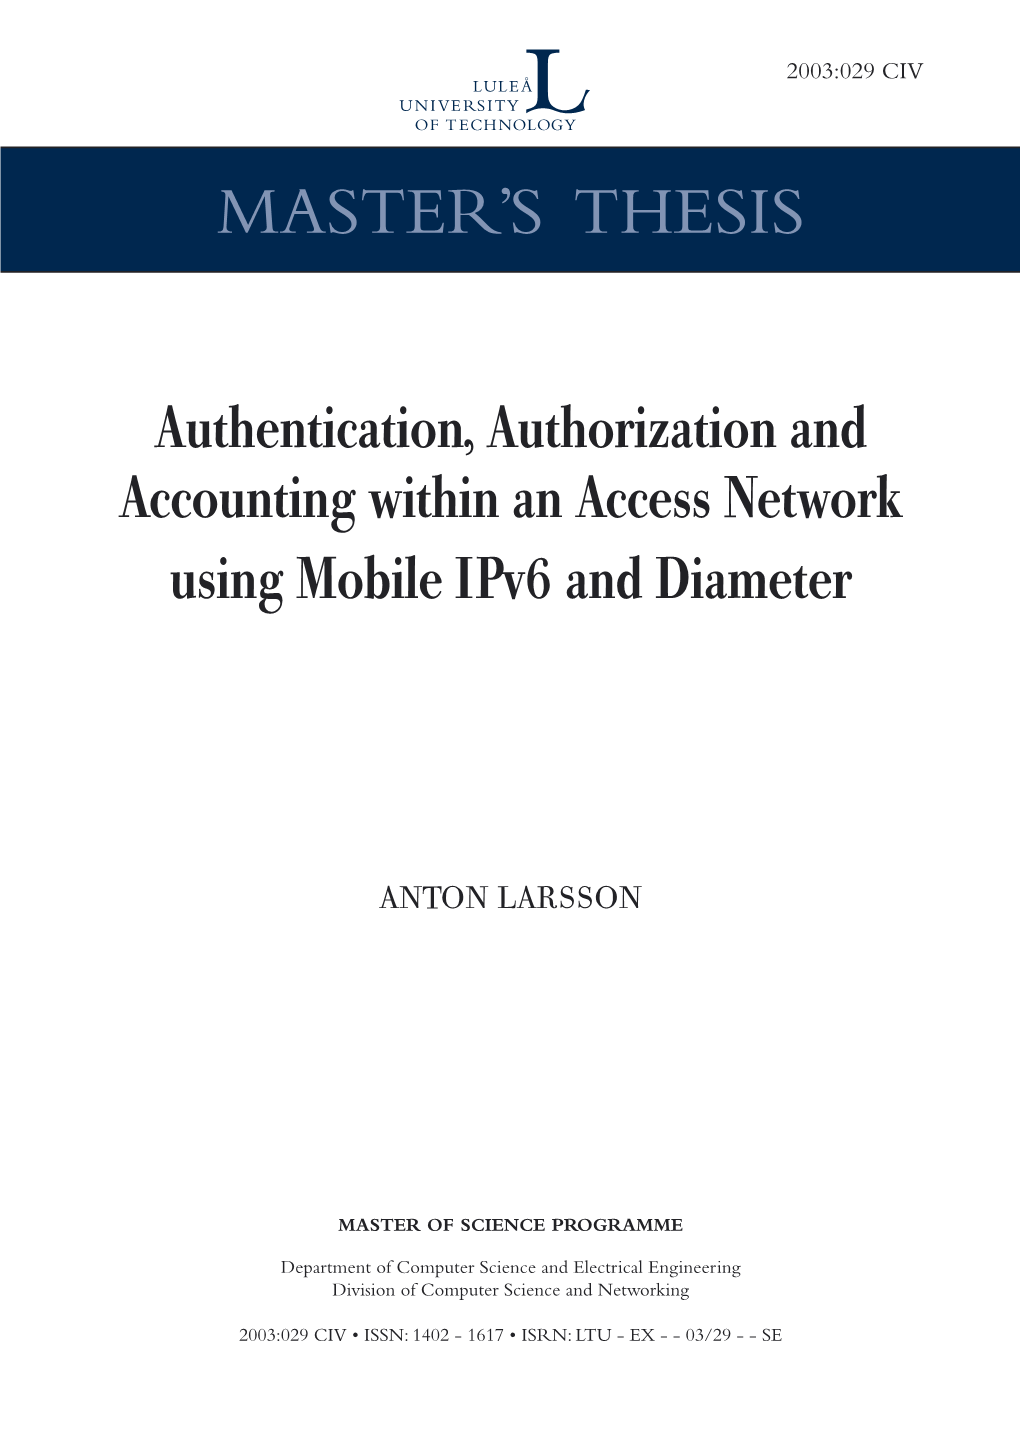 Authentication, Authorization and Accounting Within an Access Network Using Mobile Ipv6 and Diameter